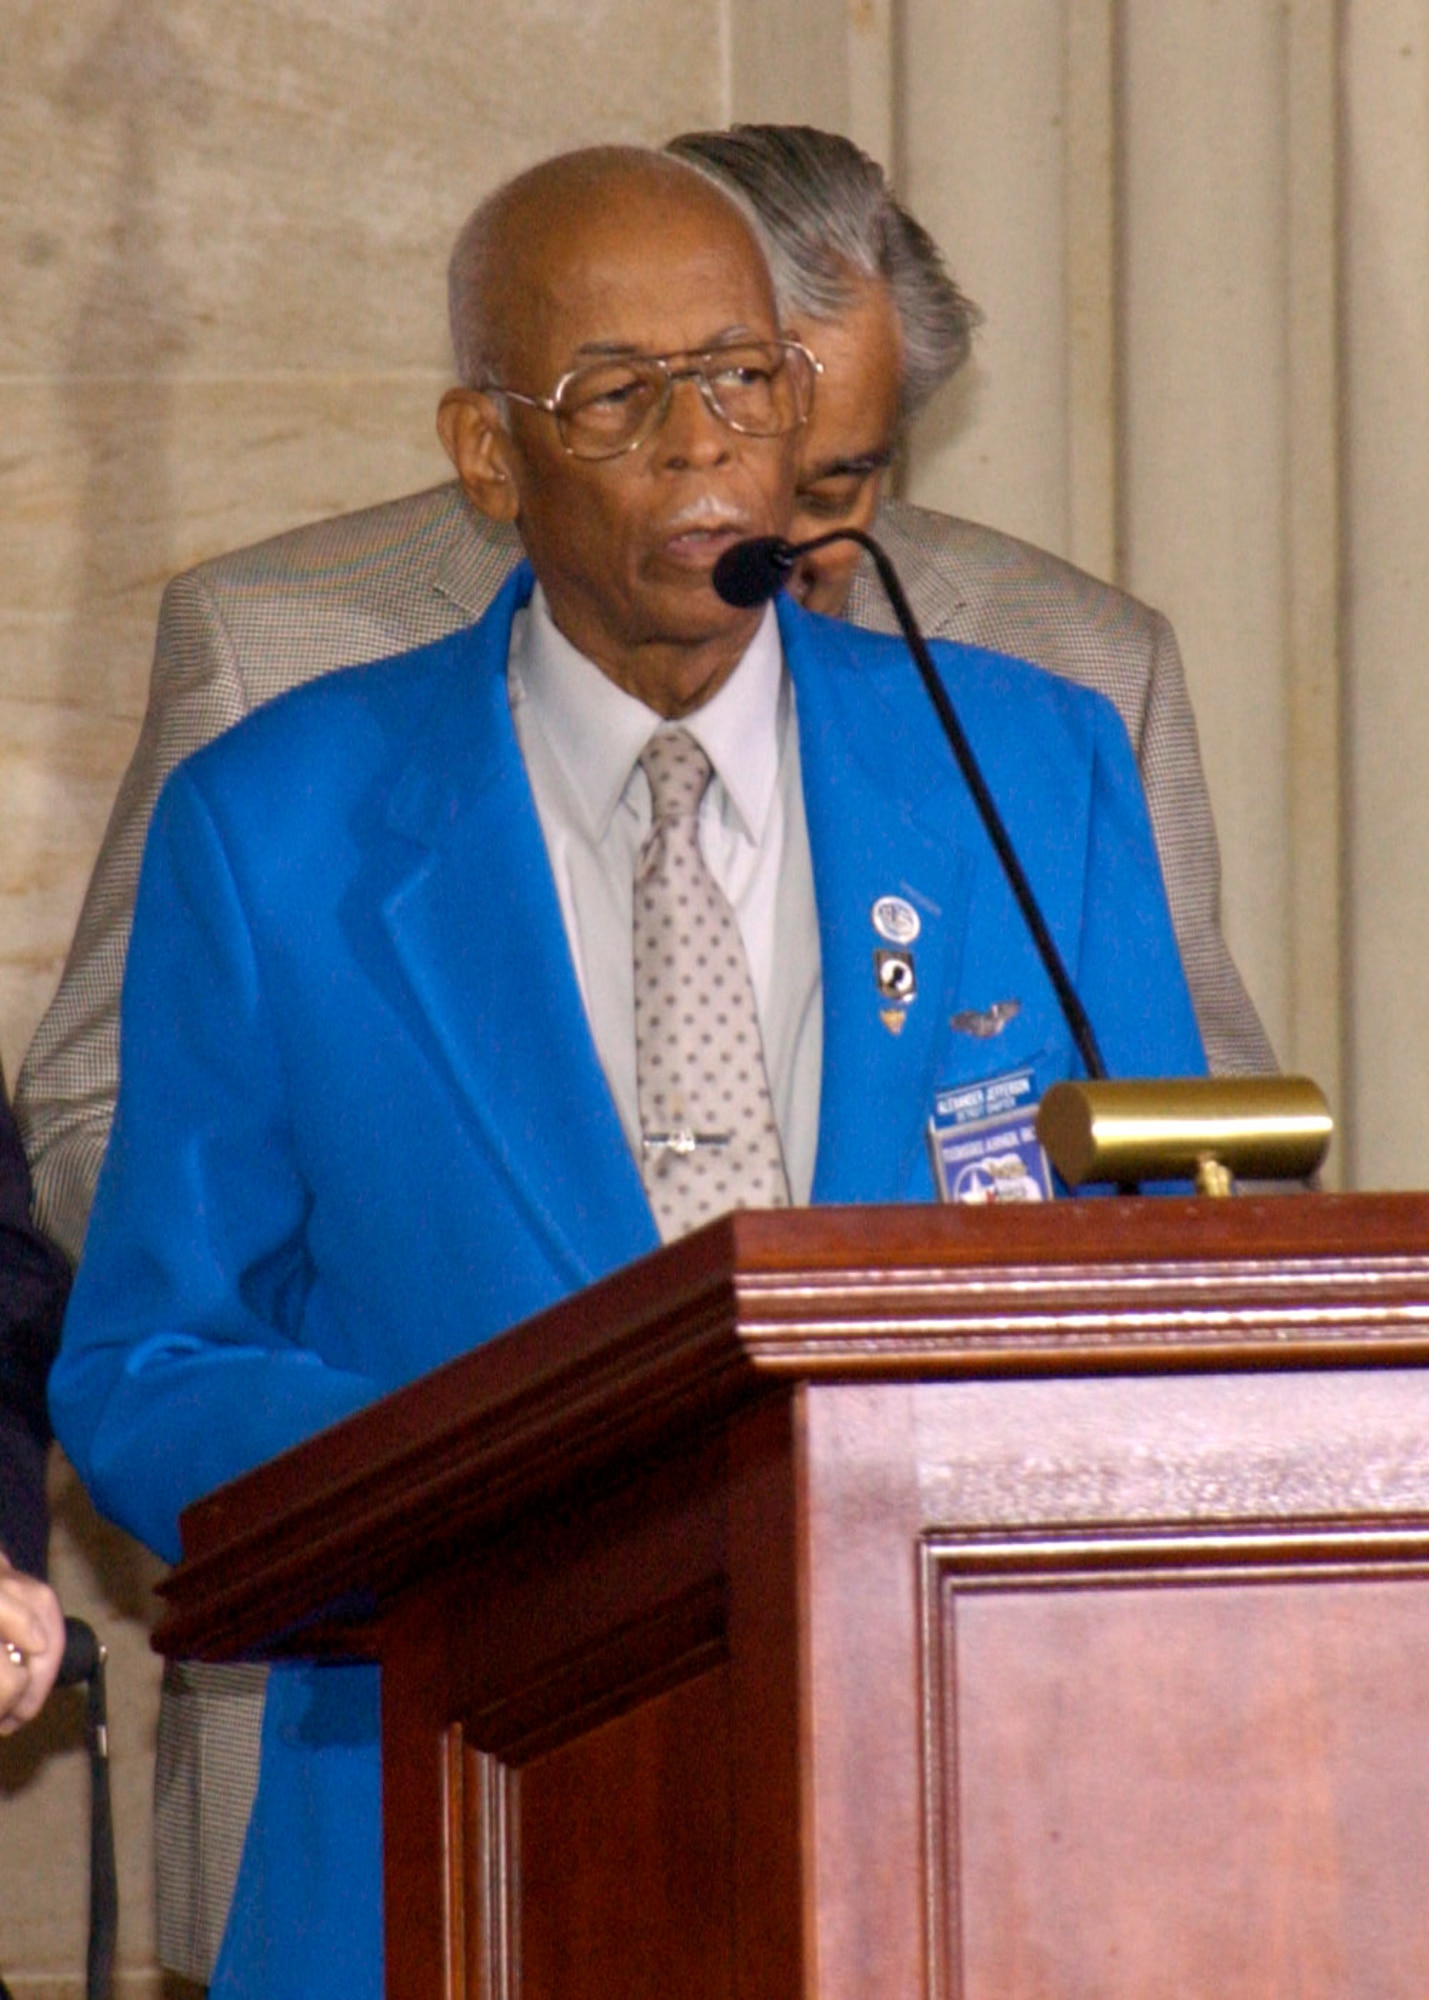 Retired Lt. Col. Alexander Jefferson, a Tuskegee Airman, addresses the crowd during a Congressional Gold Medal Ceremony March 29 at the Capitol Rotunda in Washington. The award recognized the accomplishments of the Tuskegee Airmen.  Colonel Jefferson was a pilot with the 332nd Fighter Group during World War II. (U.S. Air Force photo/Faith Harris)